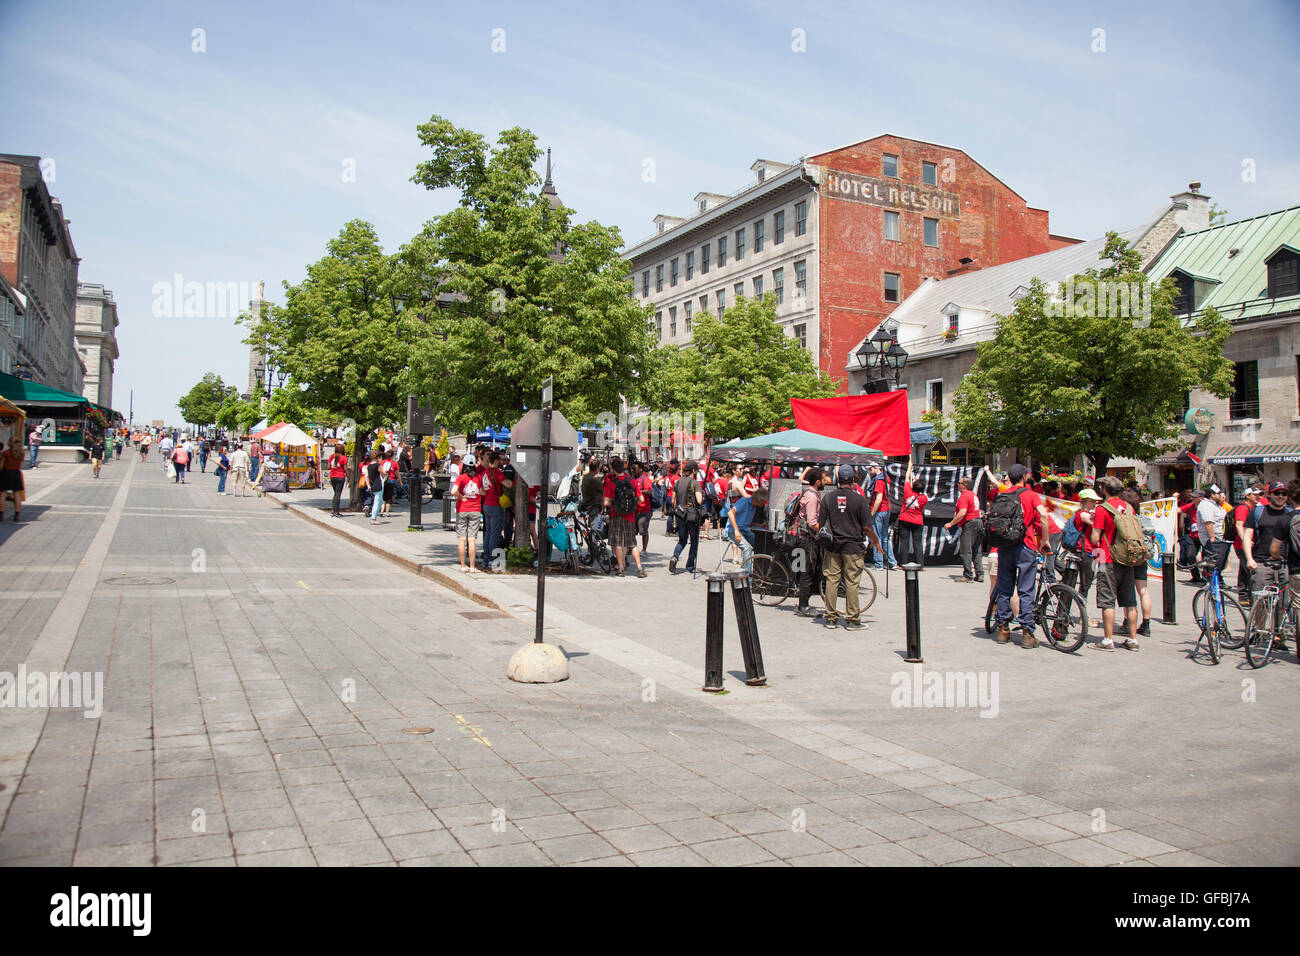 MONTREAL - MAY 27, 2016: Place Jacques-Cartier in old Montreal. It has become one of the liveliest spots in the whole city, with Stock Photo